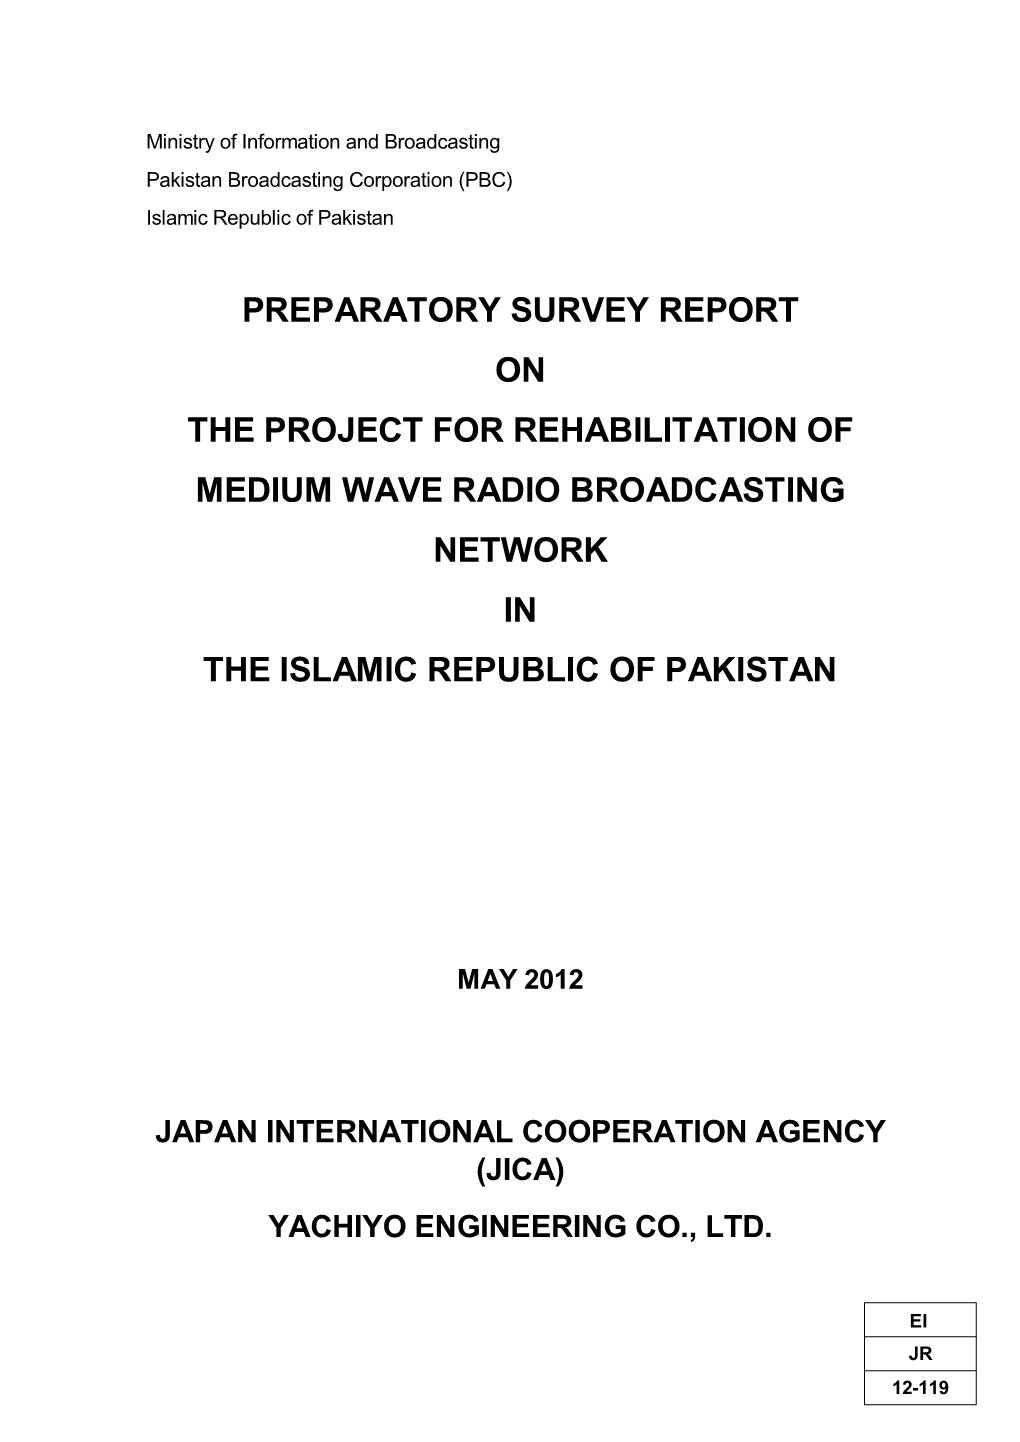 Preparatory Survey Report on the Project for Rehabilitation of Medium Wave Radio Broadcasting Network in the Islamic Republic of Pakistan